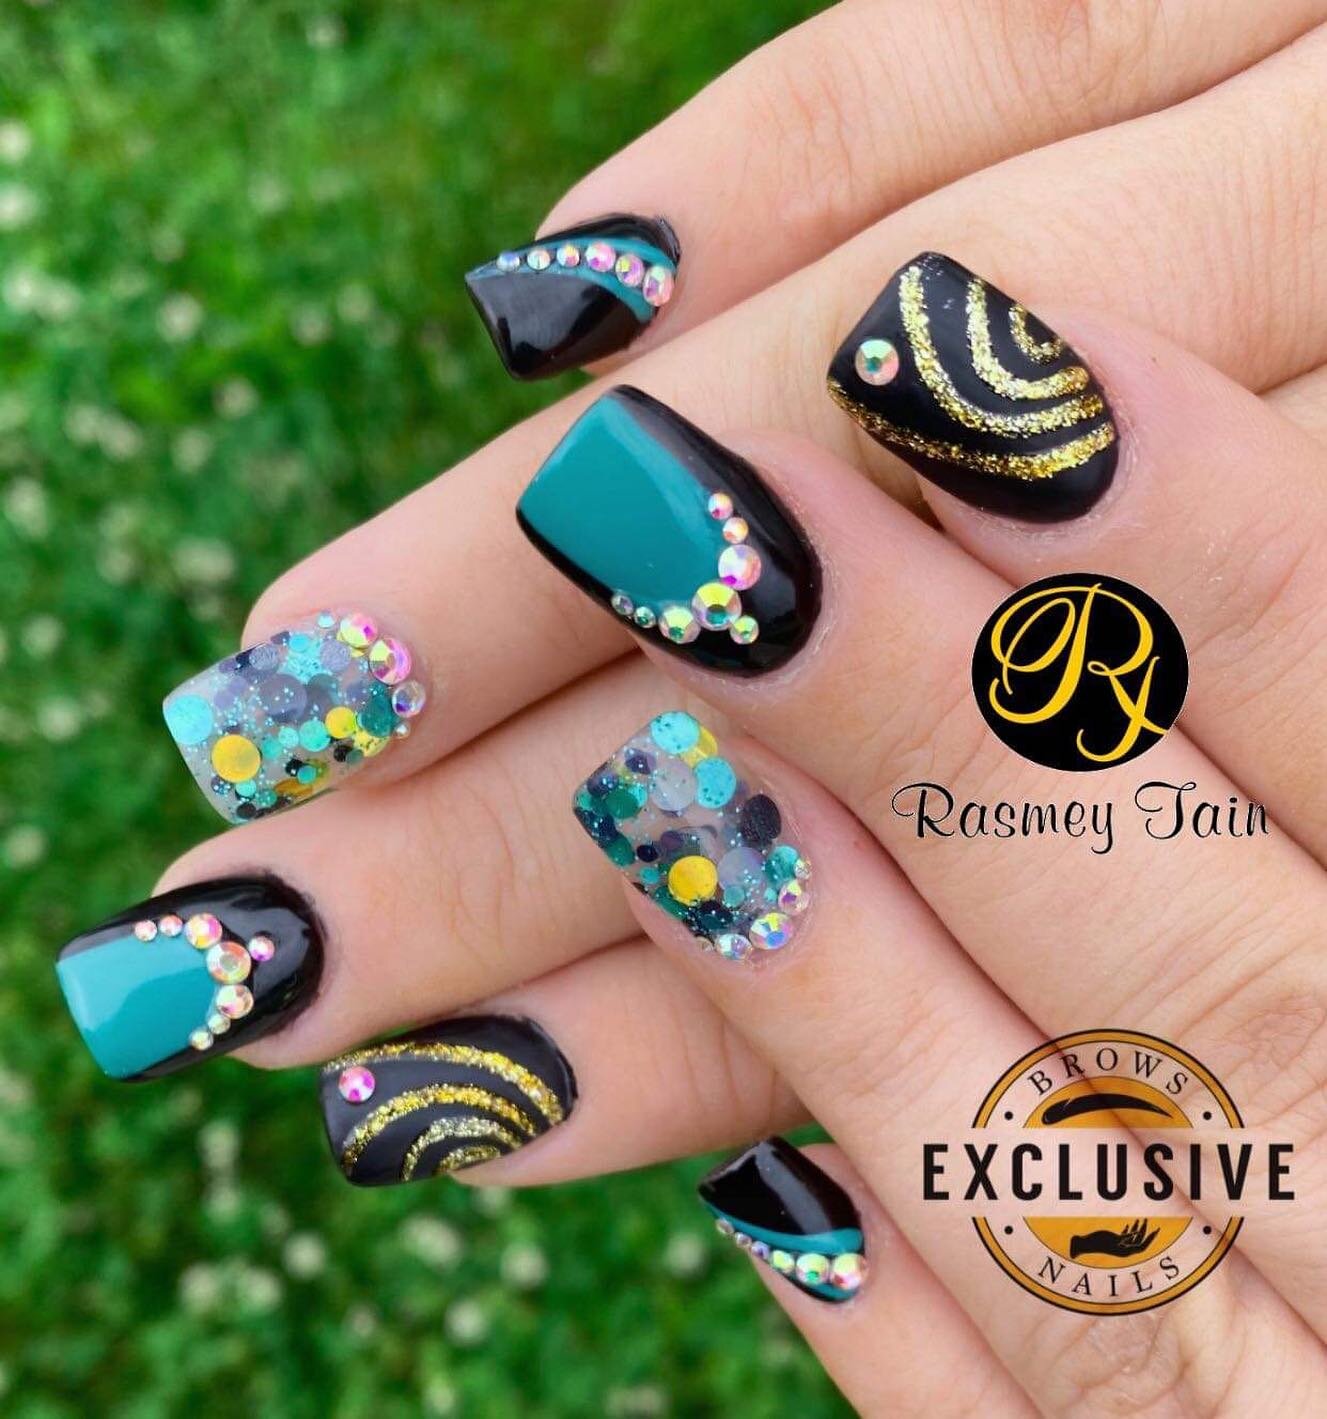 Just a lil&rsquo; turquoise moment to start the week off right! 
-
-
-
-
-
-
-
#nailsofinstagram #naildesigns #nails #manicure #nailset #acrylicnails #nailart